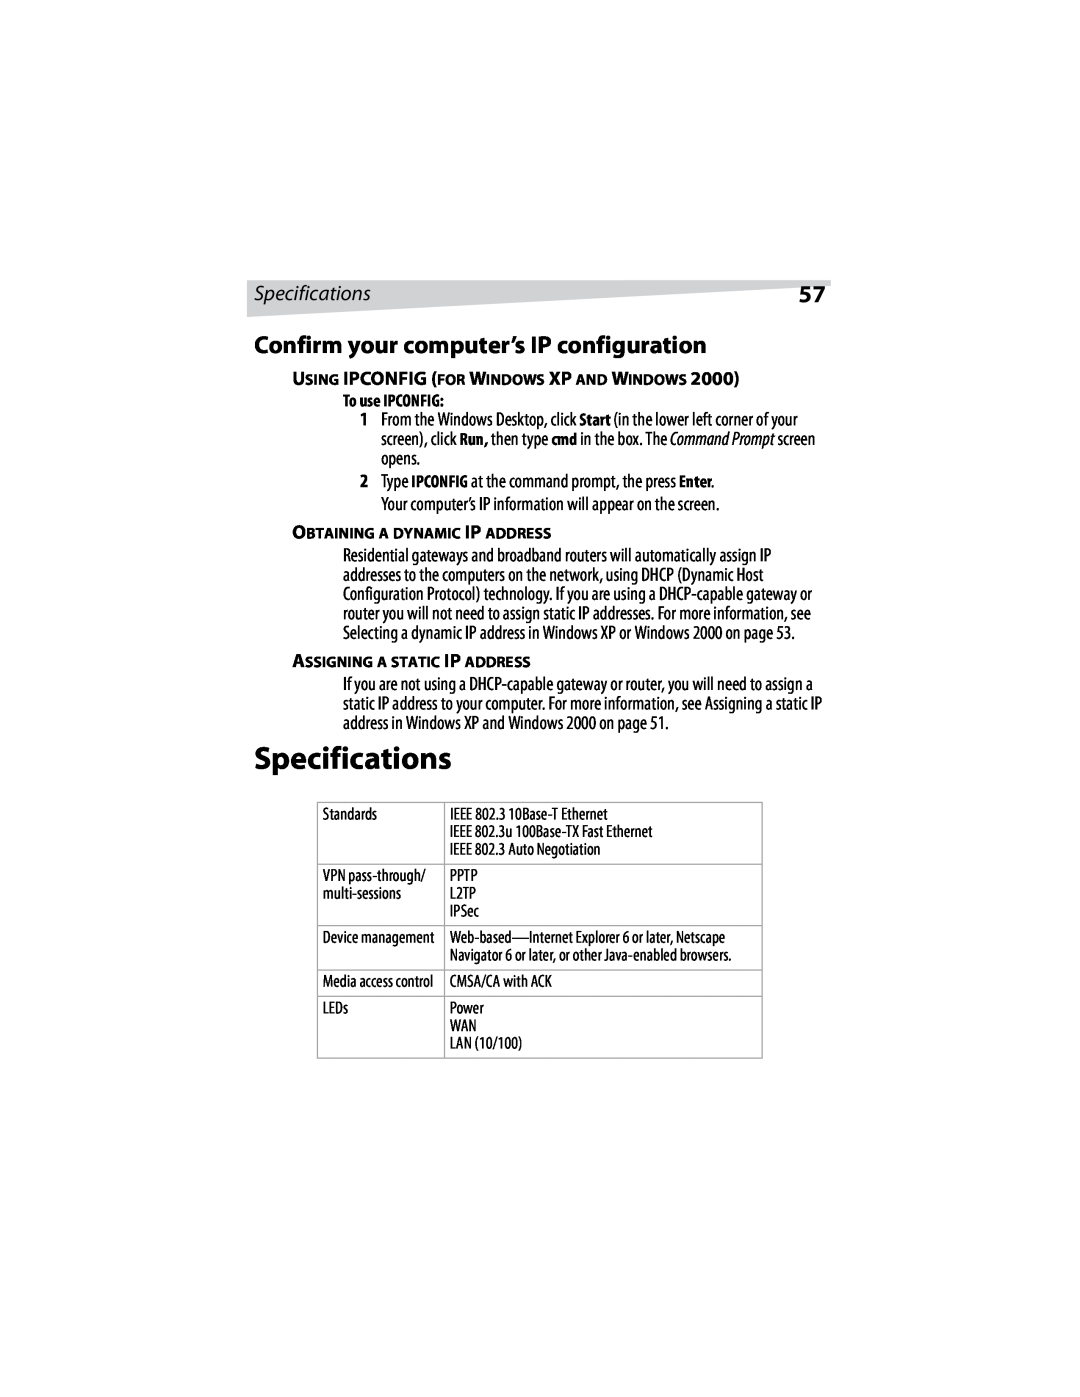 Dynex DX-E401 manual Specifications, Confirm your computer’s IP configuration, To use IPCONFIG 